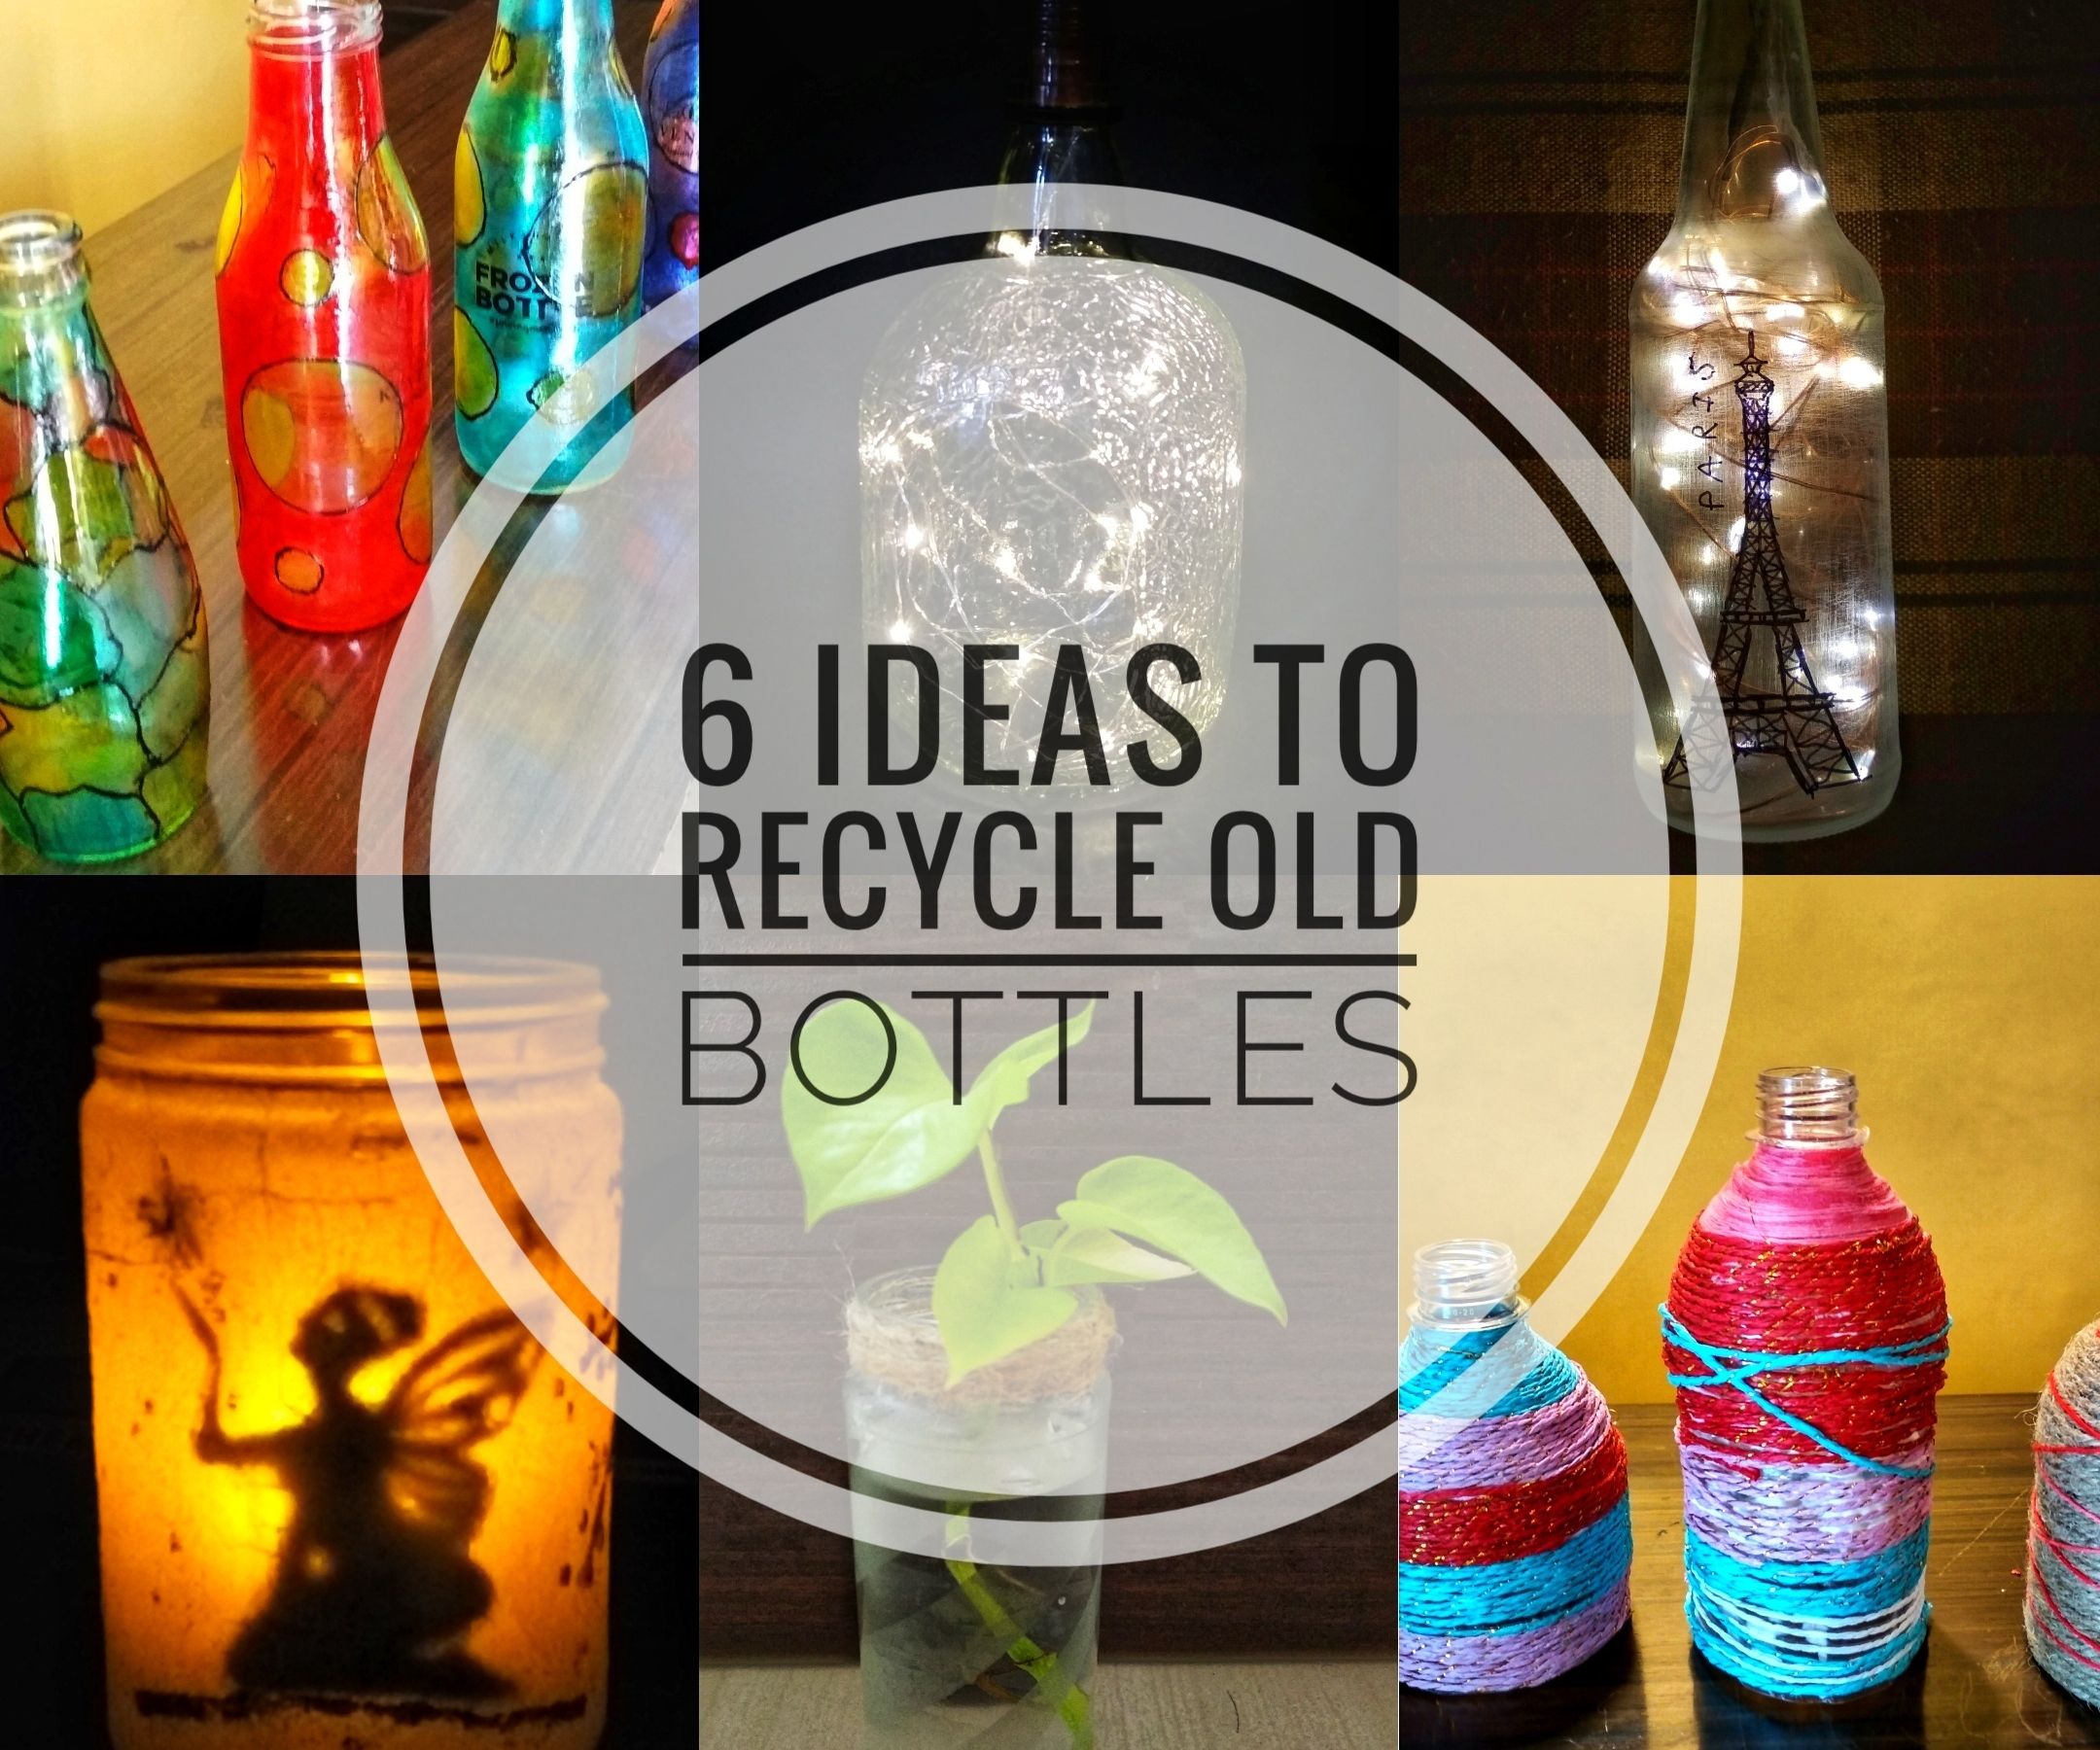 6 Ideas to Recycle Old Bottles